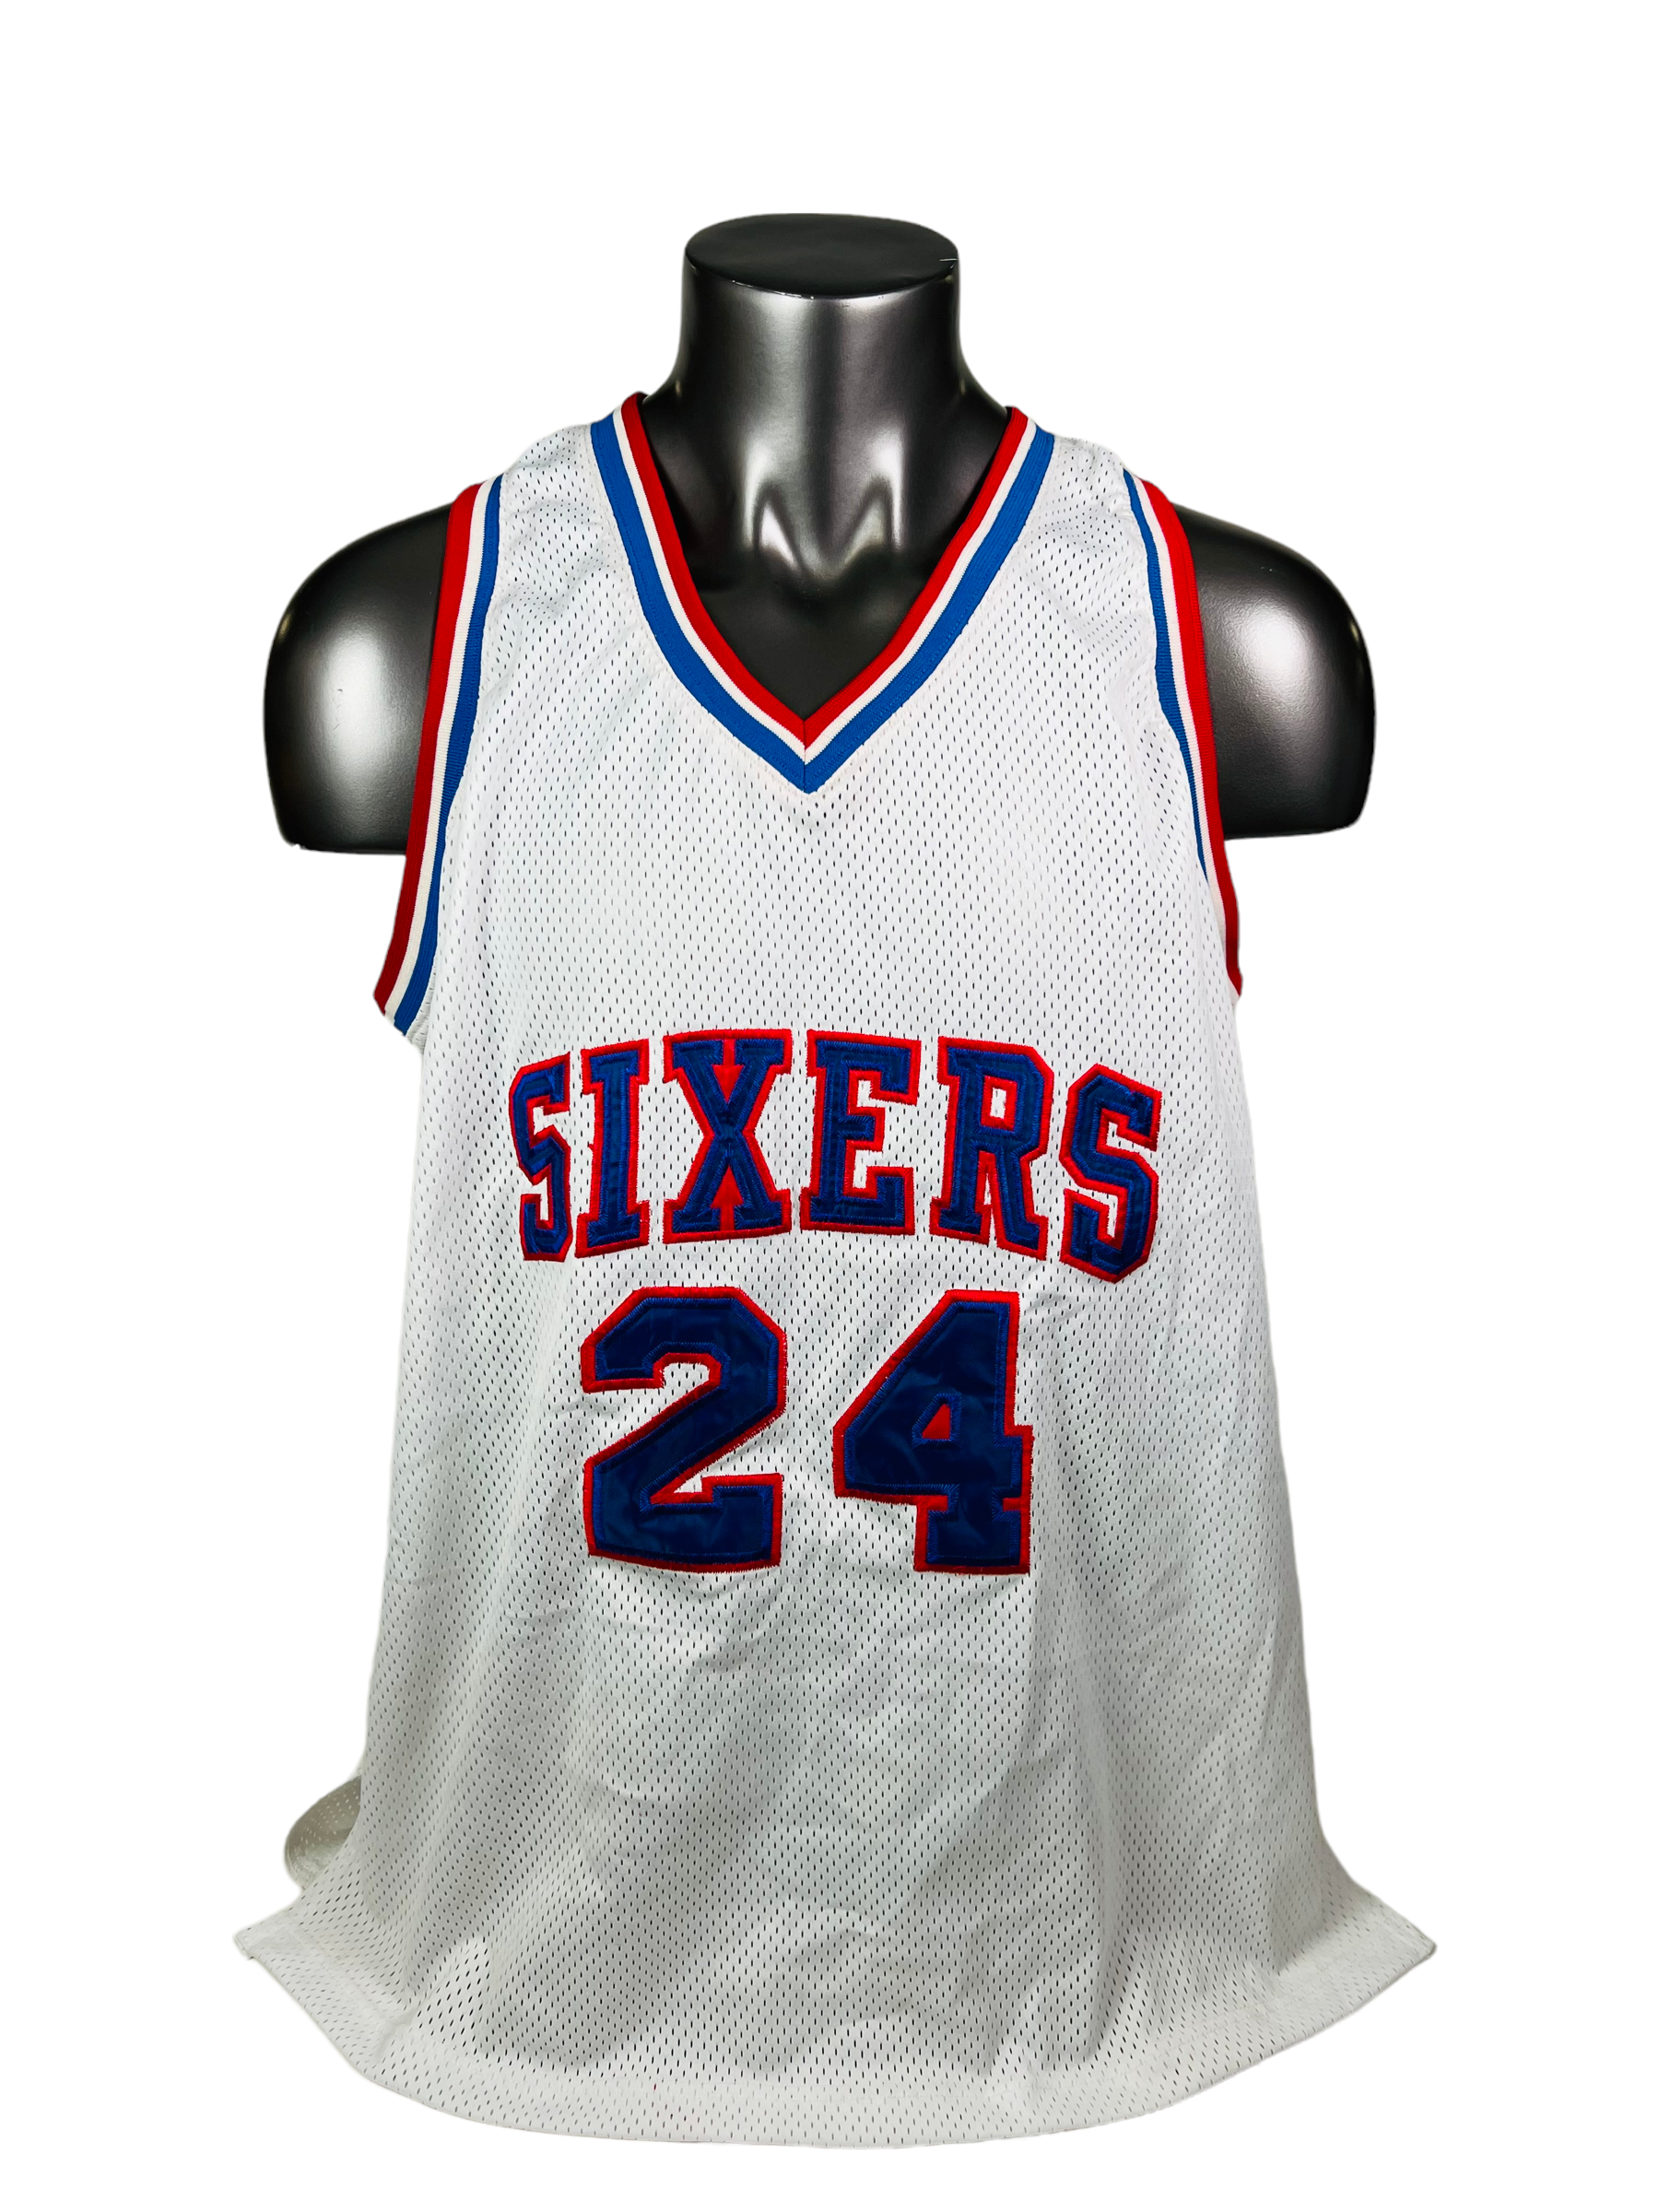 76ers jersey